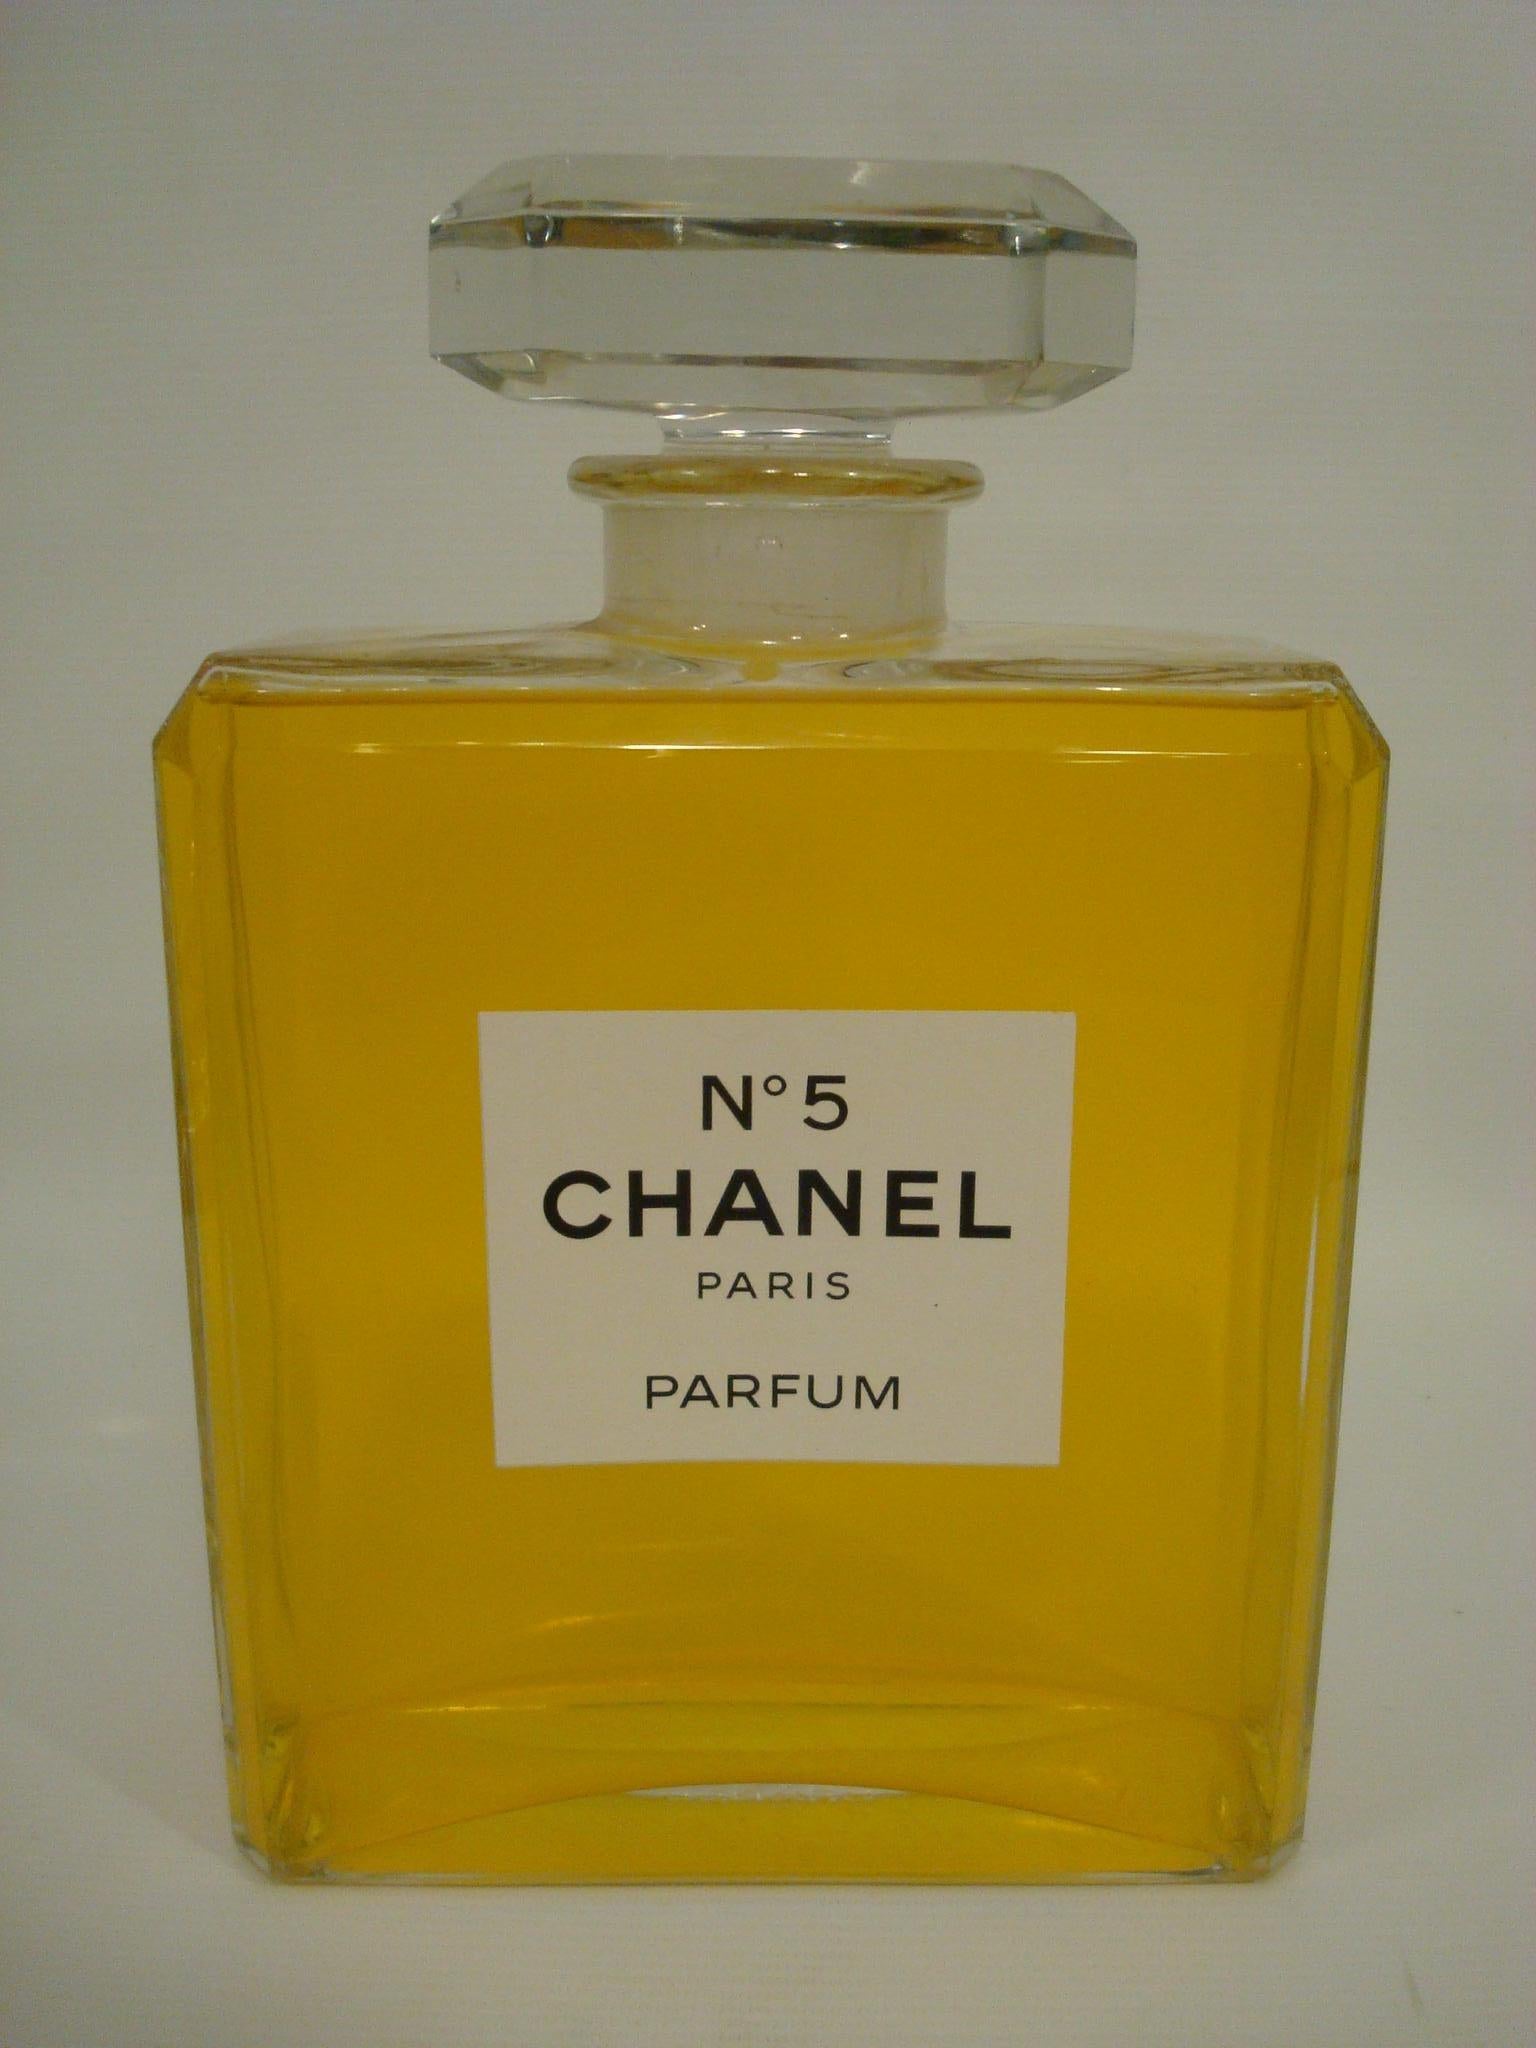 Store display large perfume advertising. (factice / dummy perfume bottle, it's not perfume, it's colored water). Perfect to decorate a guest bathroom. Everyone loves Chanel. Rare vintage Chanel No. 5 huge factice dummy display bottle this is a huge